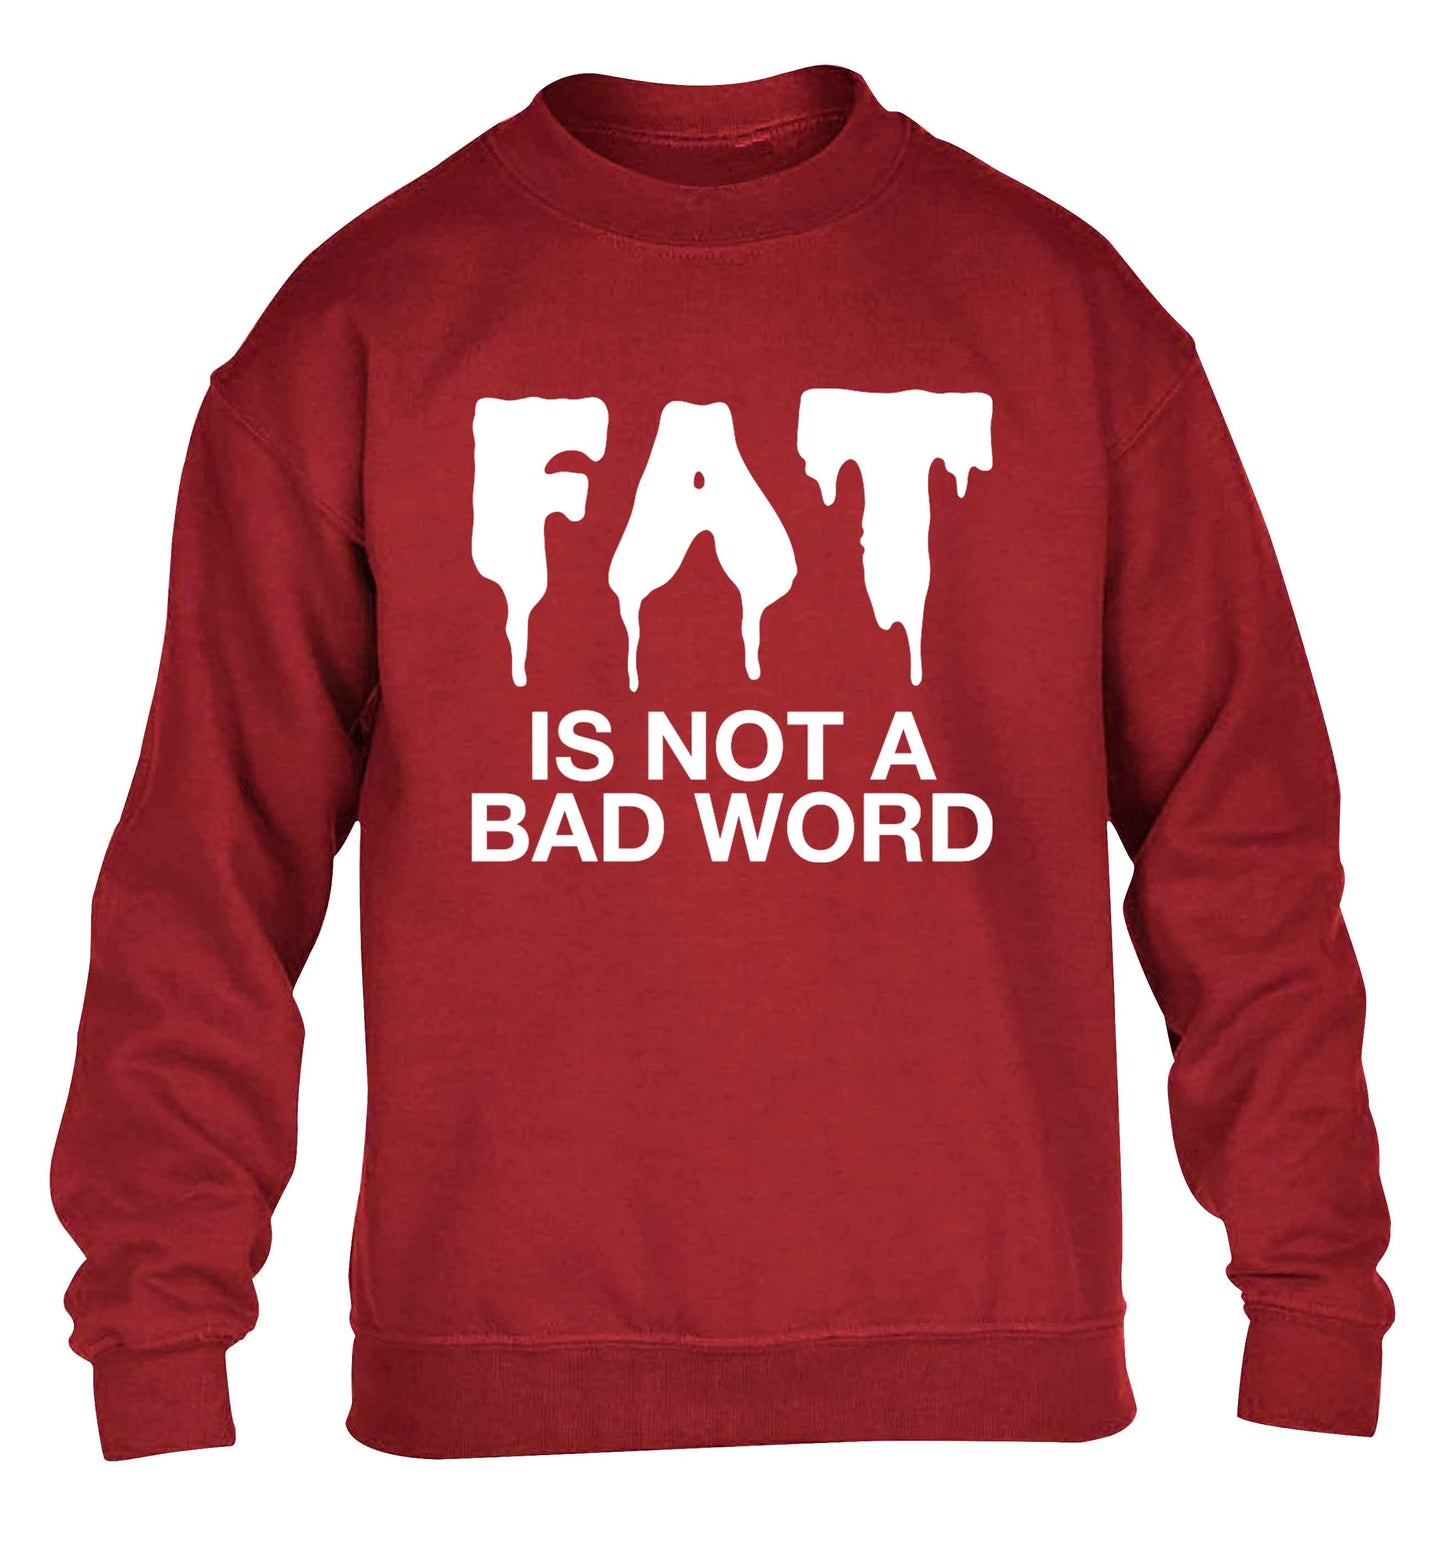 Fat is not a bad word children's grey sweater 12-13 Years